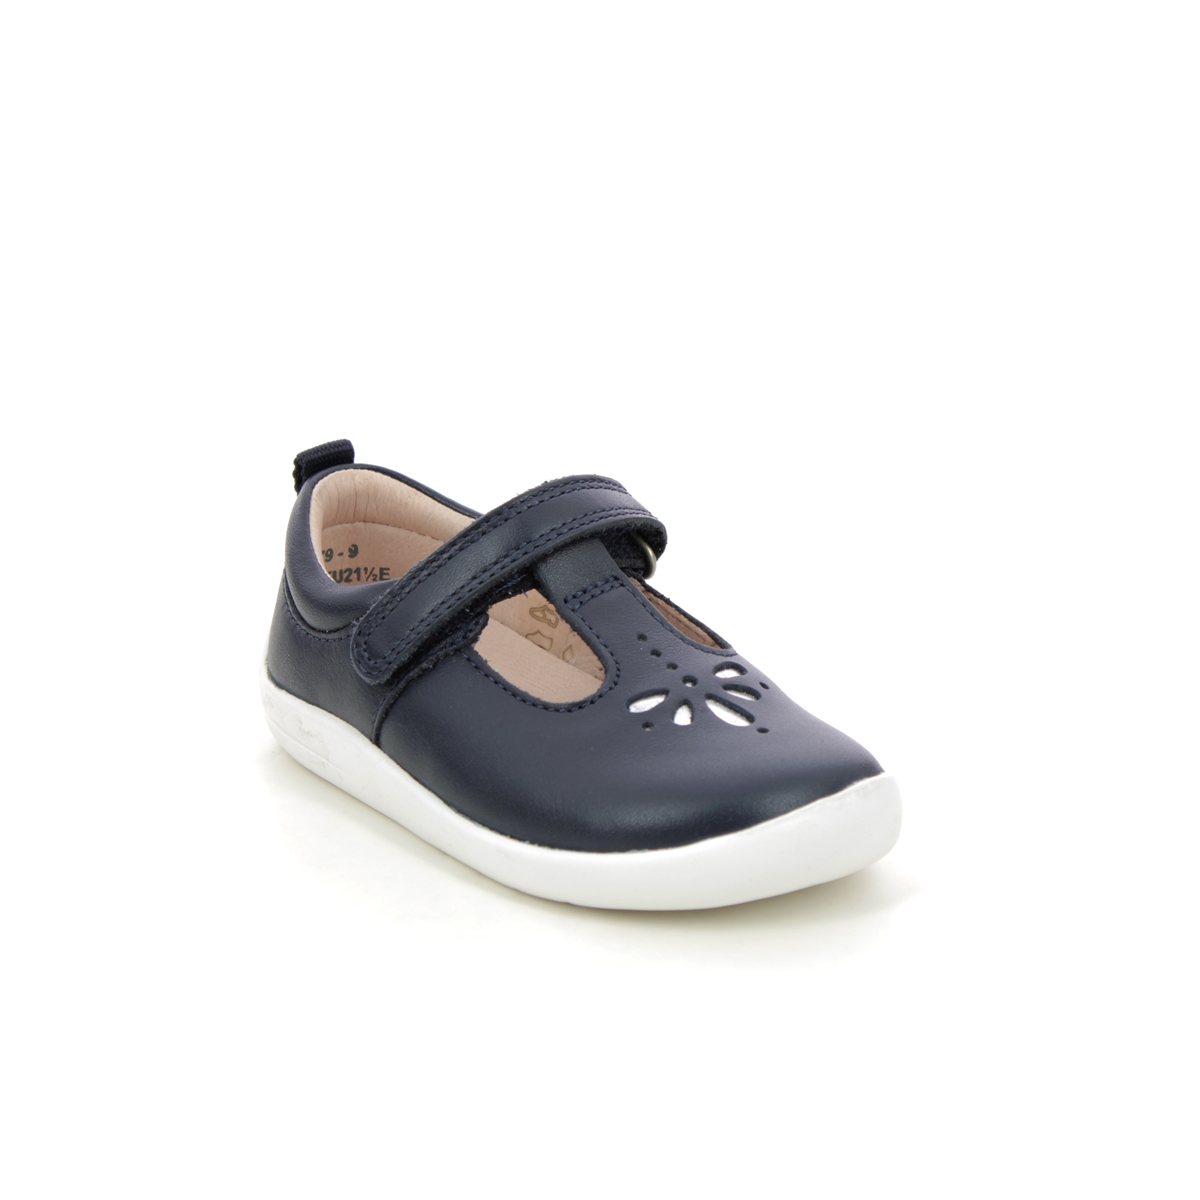 Start Rite - Puzzle In Navy Leather 0779-95E In Size 6 In Plain Navy Leather 1St Shoes & Prewalkers  In Navy Leather